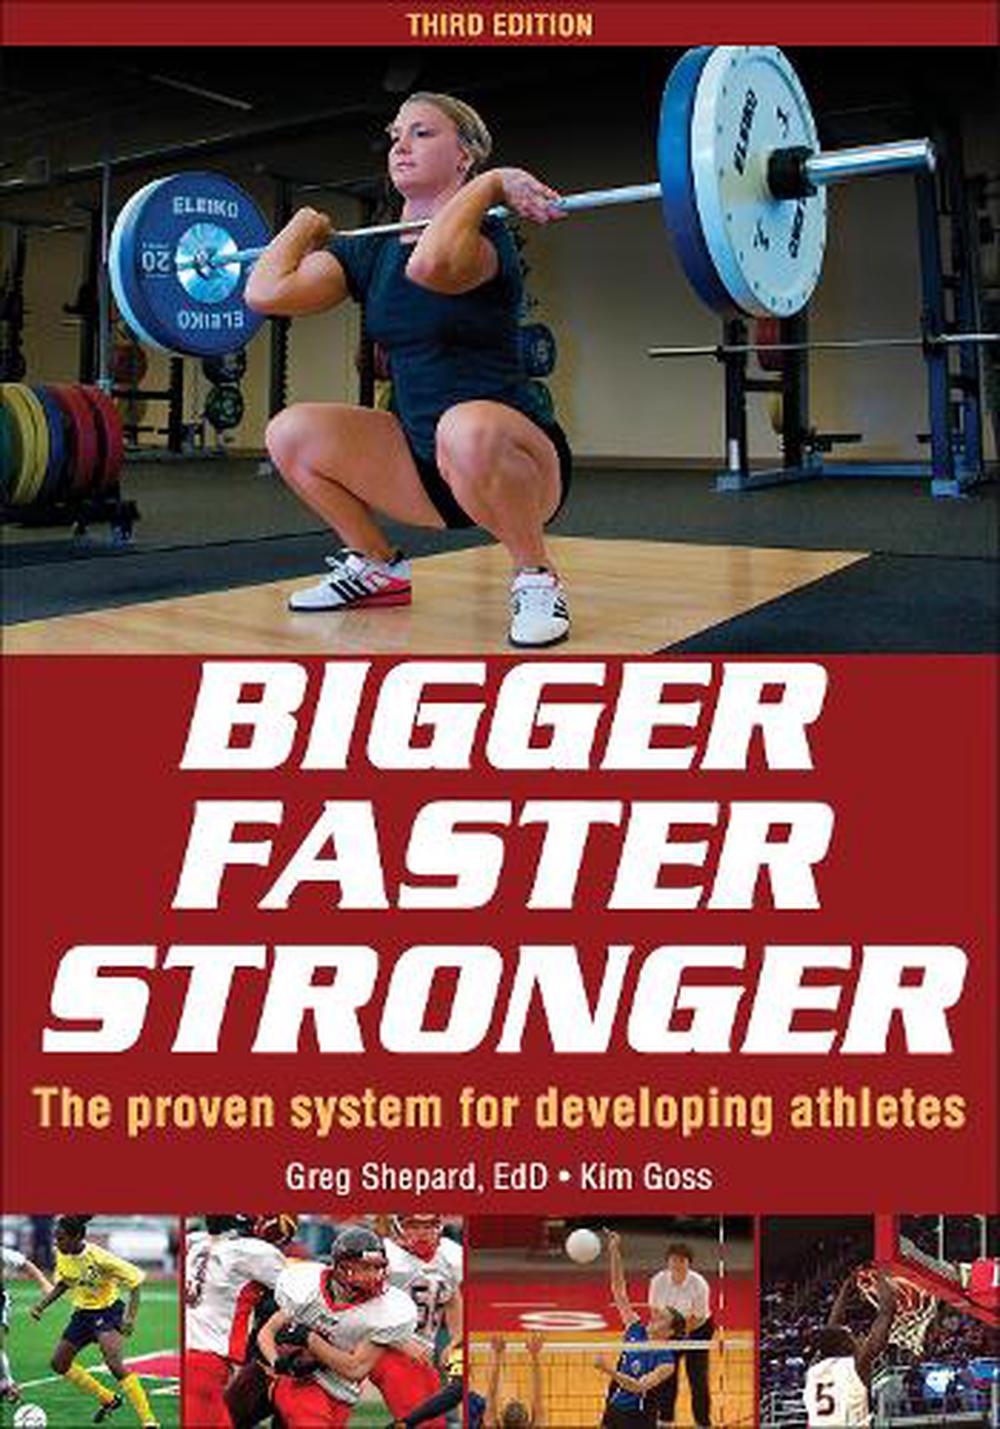 5 Day Bigger faster stronger workout book for Push Pull Legs